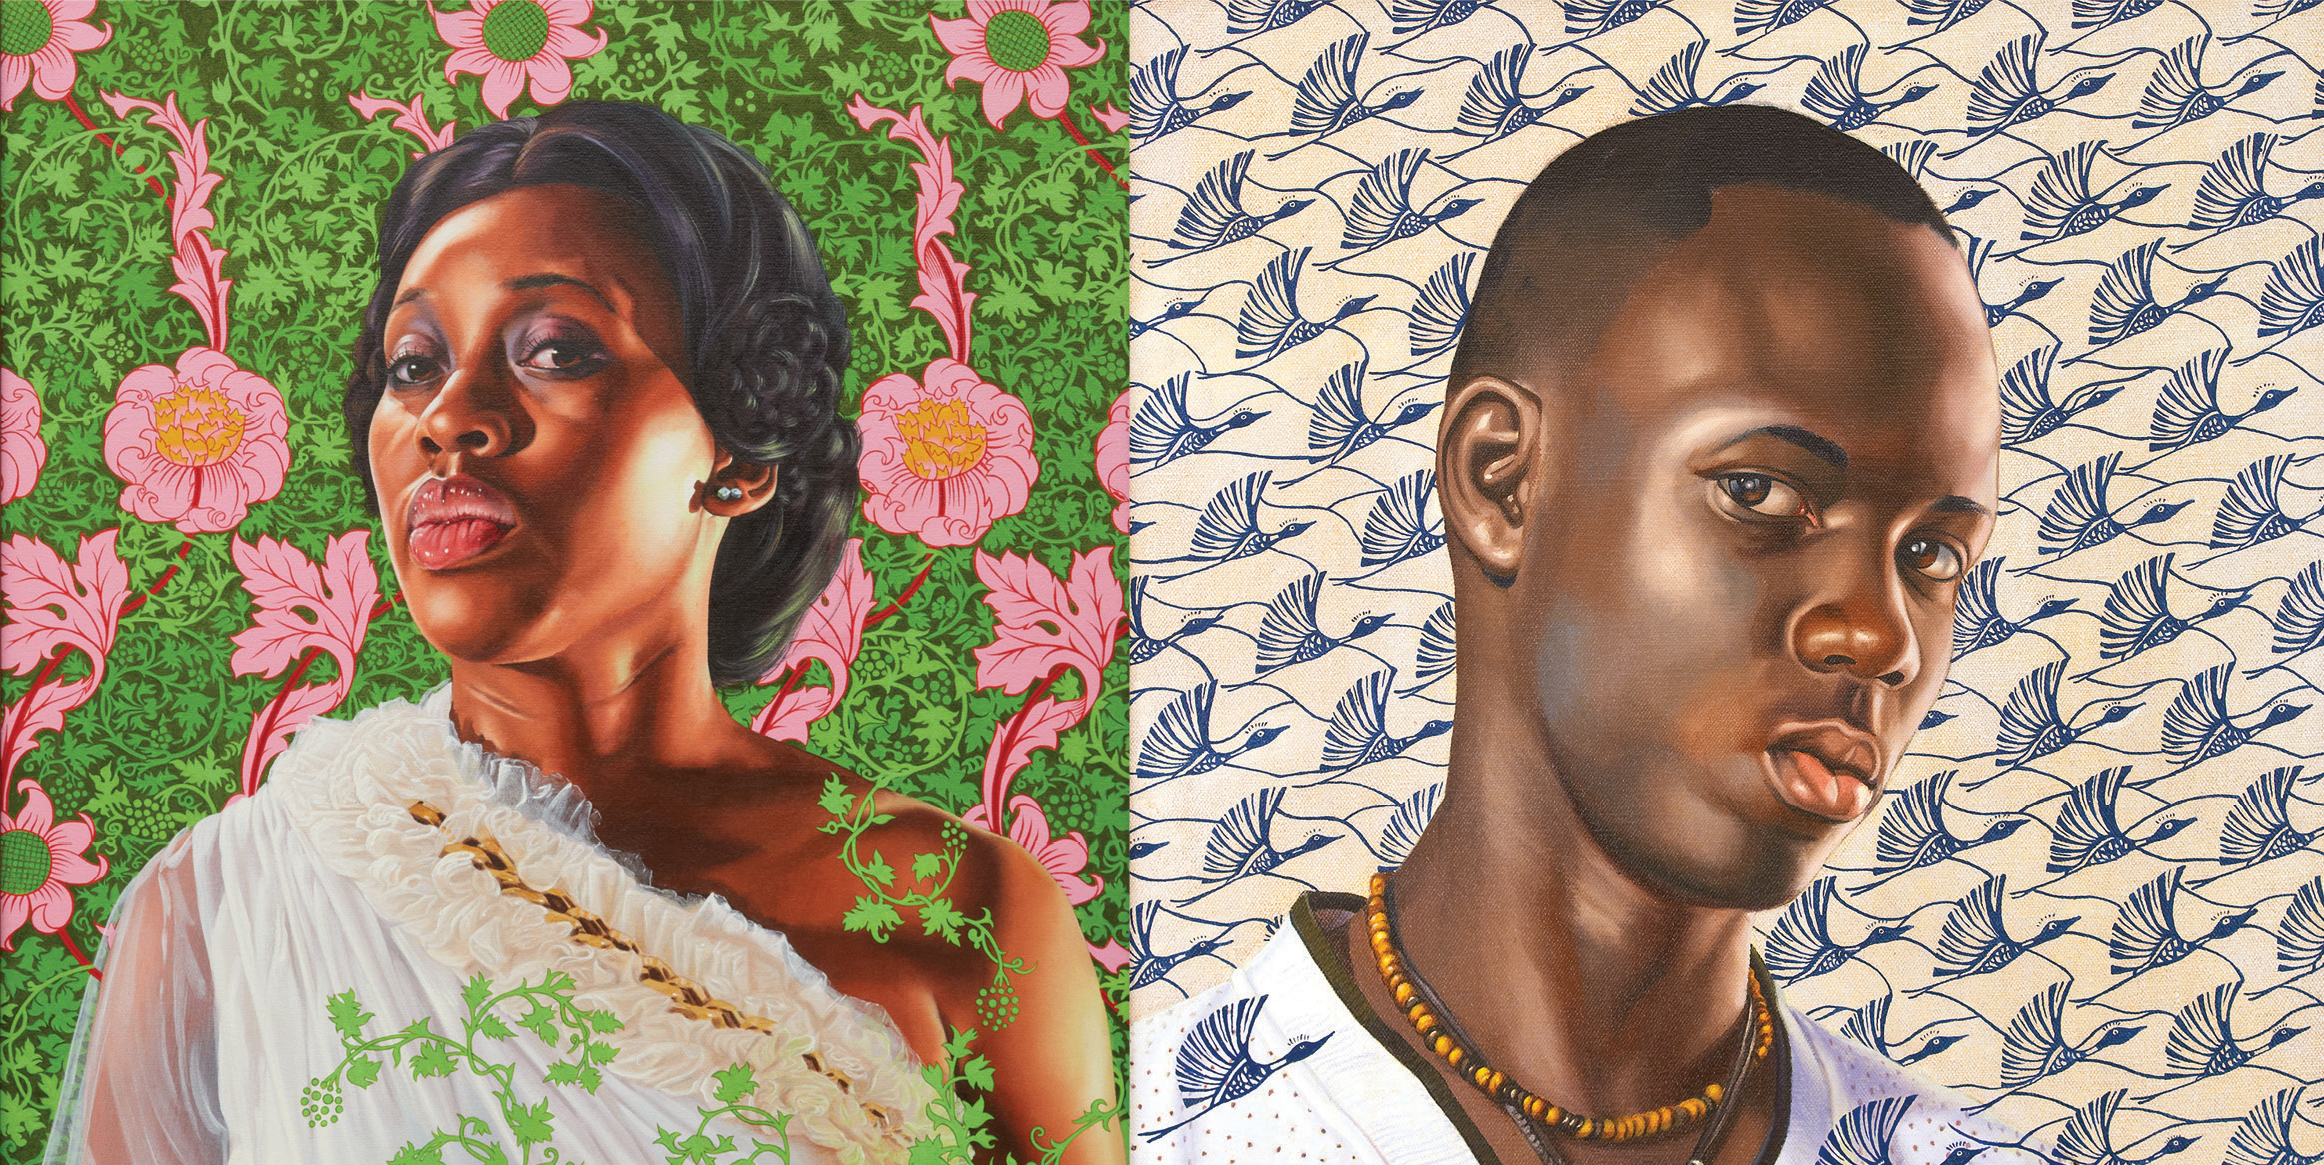 Two oil painting portraits on colorful patterned backgrounds.